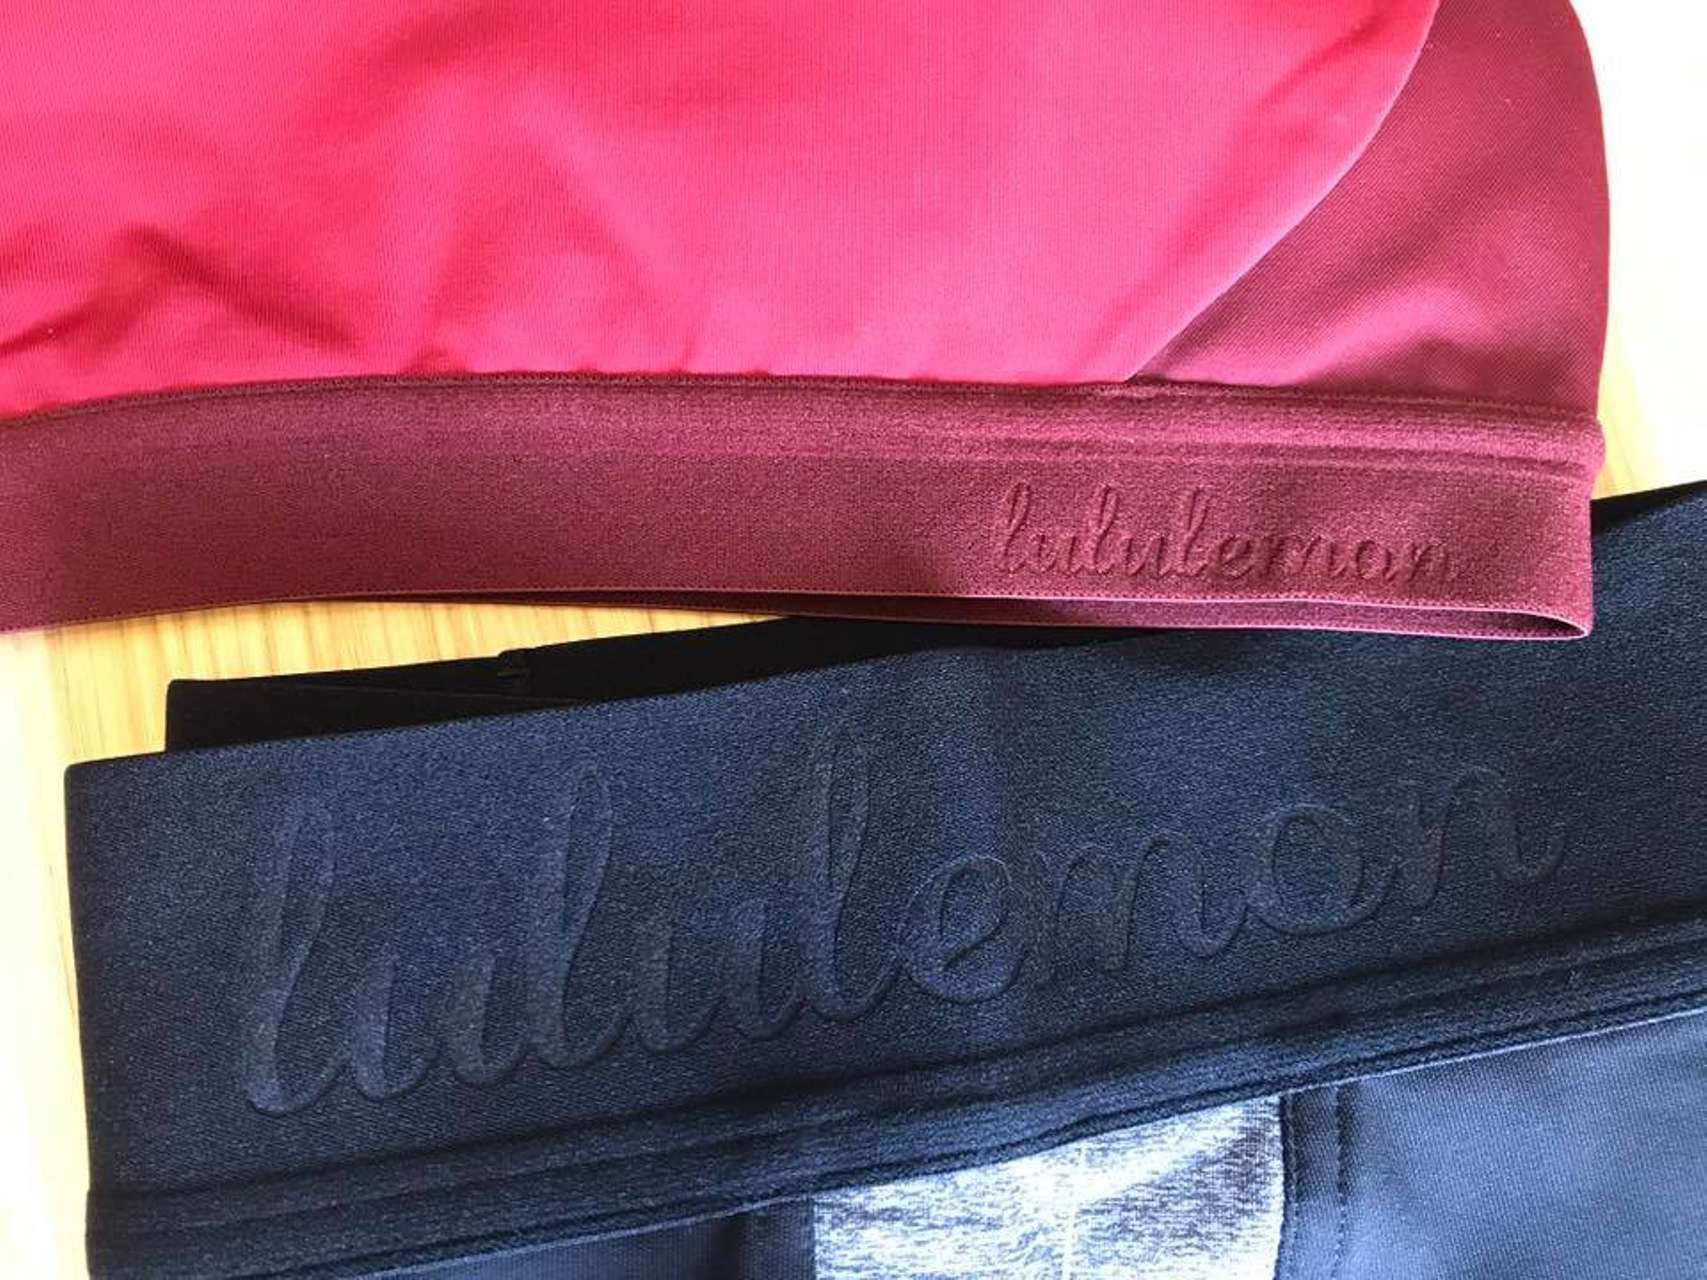 Lululemon Box It Out Tight - Deep Rouge / Oxblood